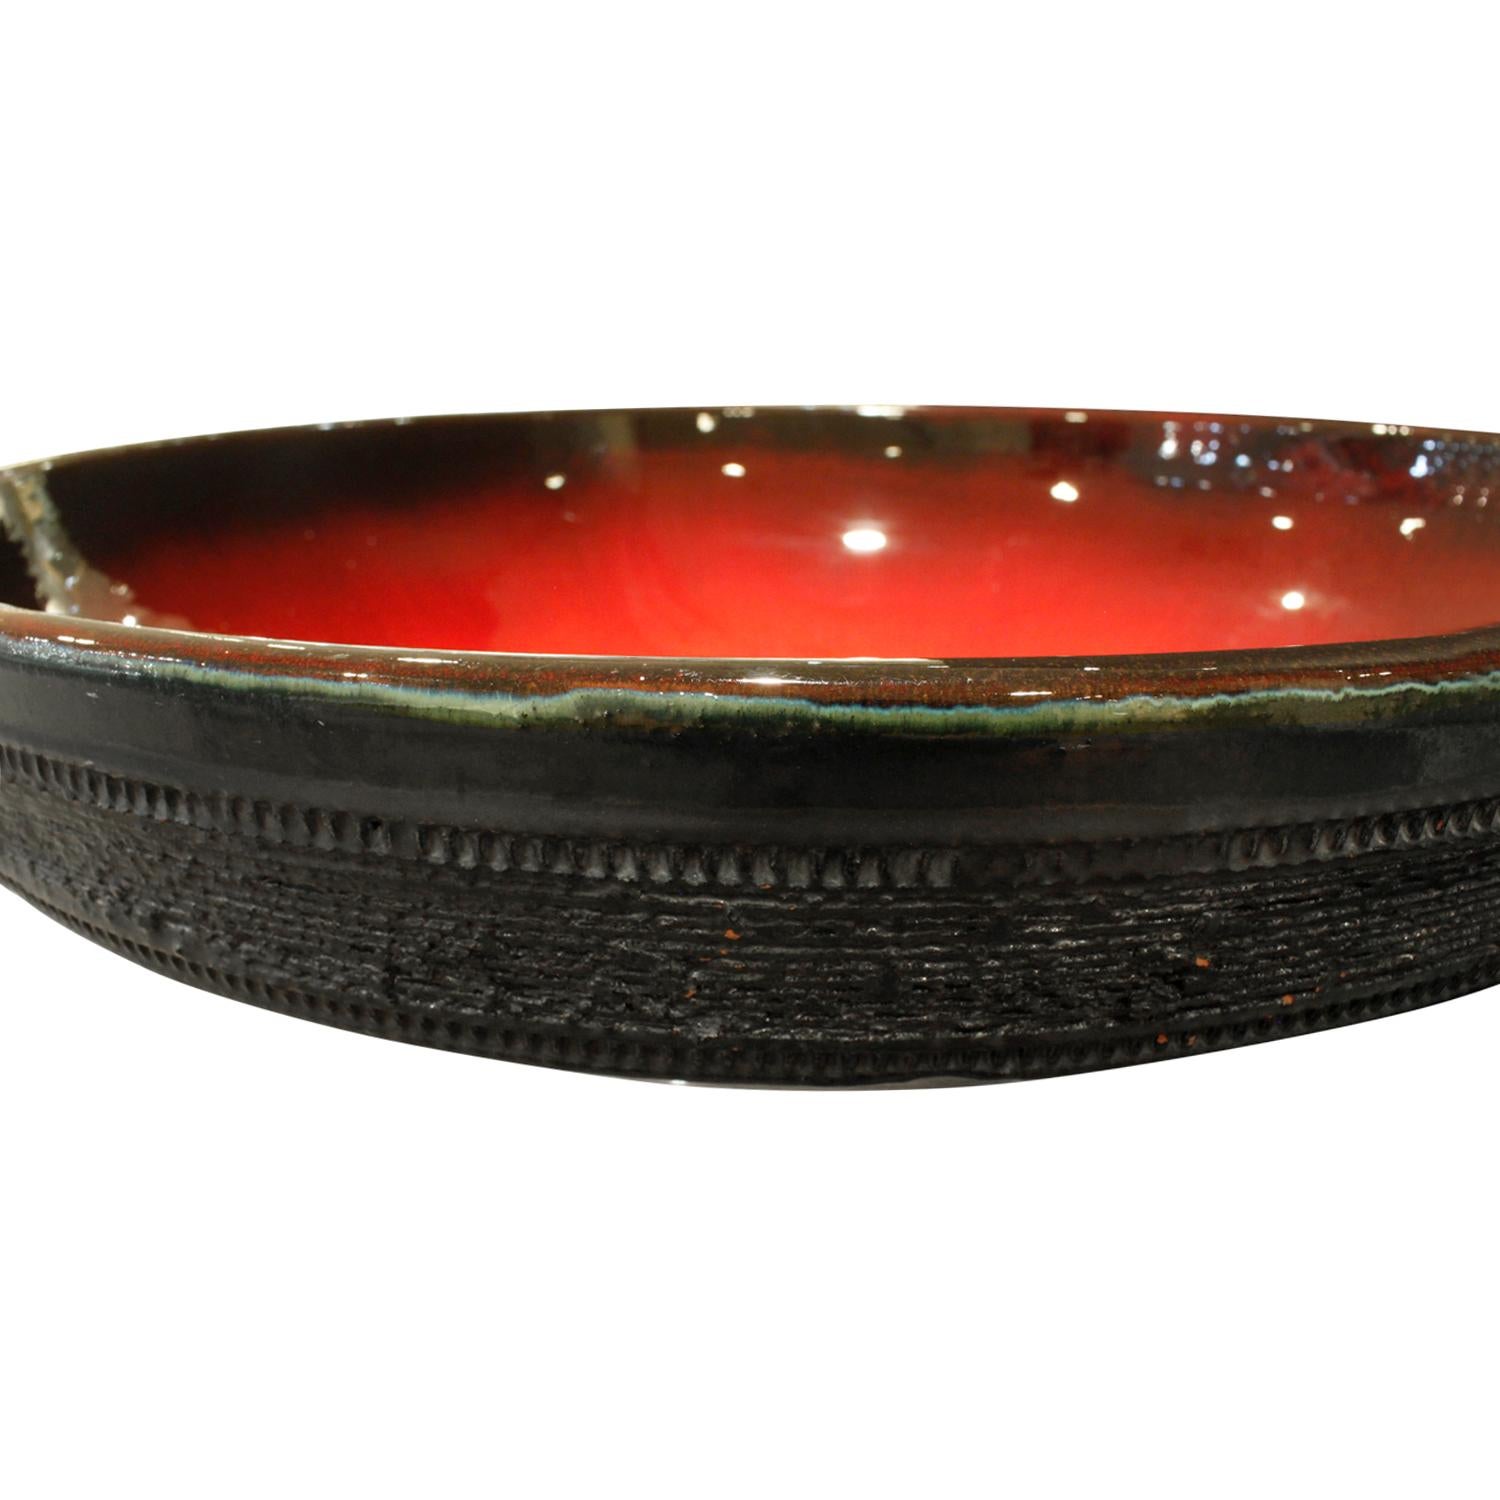 Mid-Century Modern Rogier Vandweghe Large Ceramic Bowl with Red and Black Glazes 1960s 'Signed'